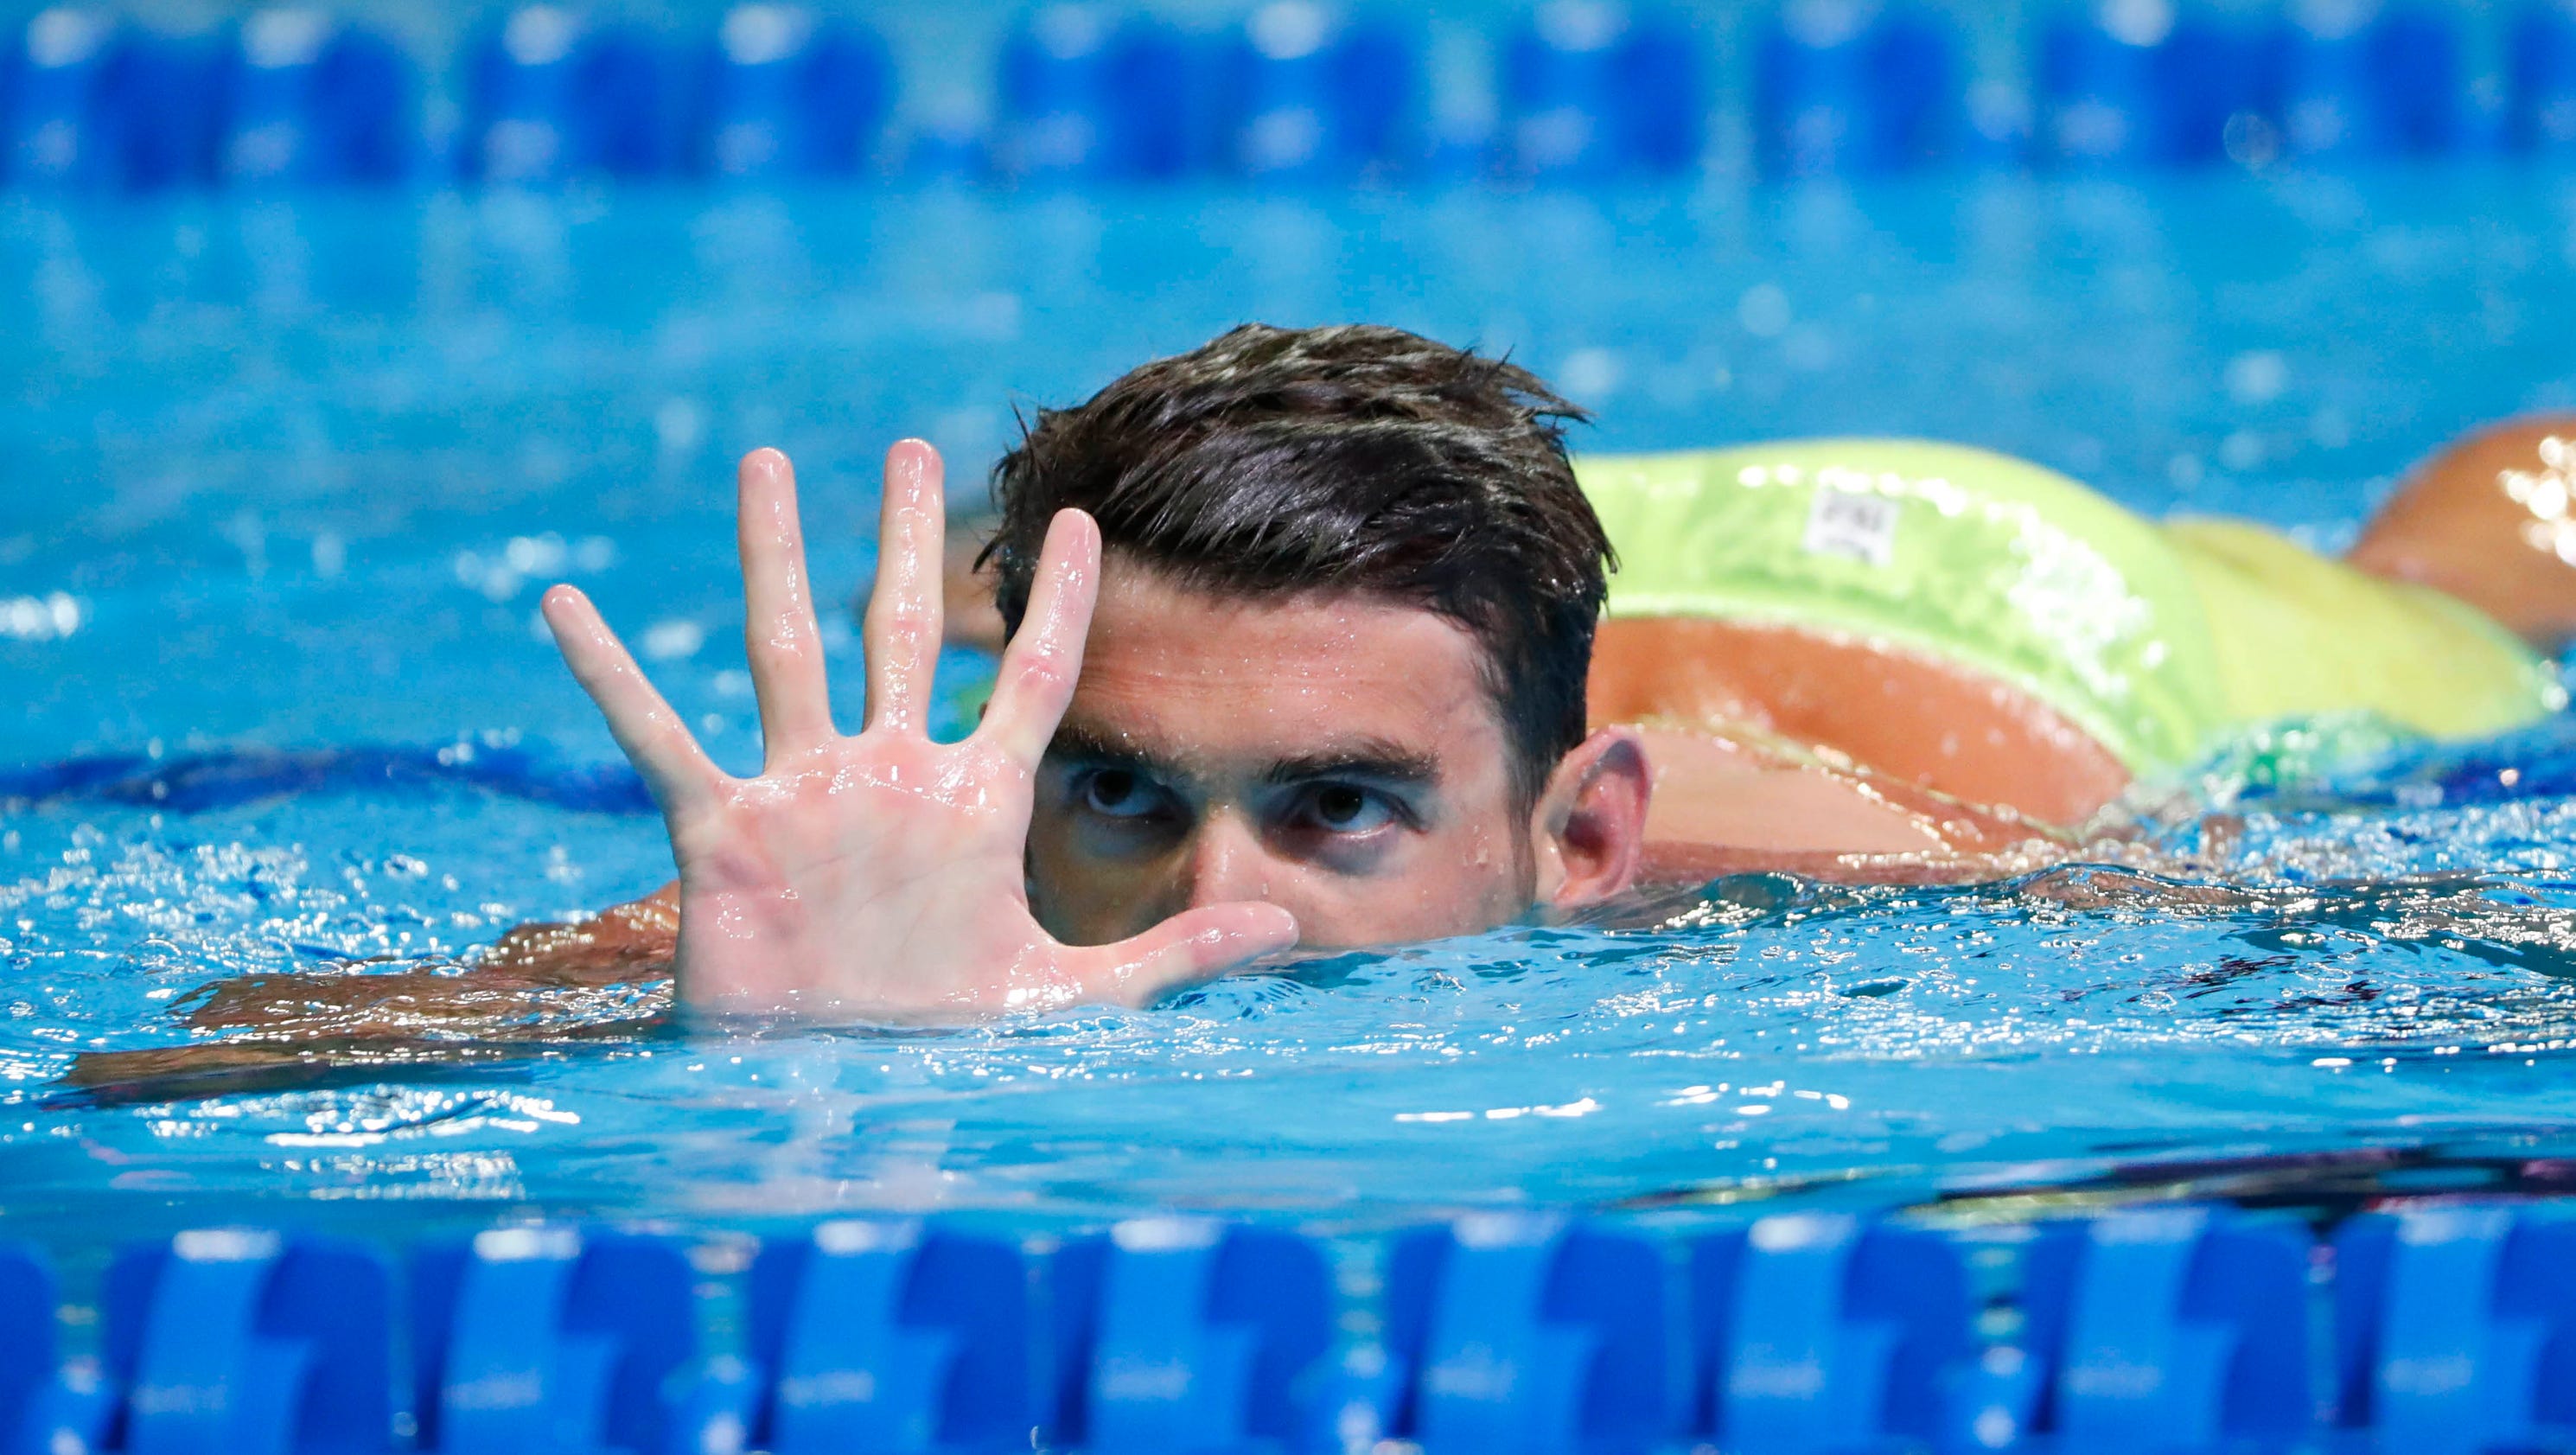 Michael Phelps Headed To Rio Becomes First Male Swimmer To Make Five Olympics